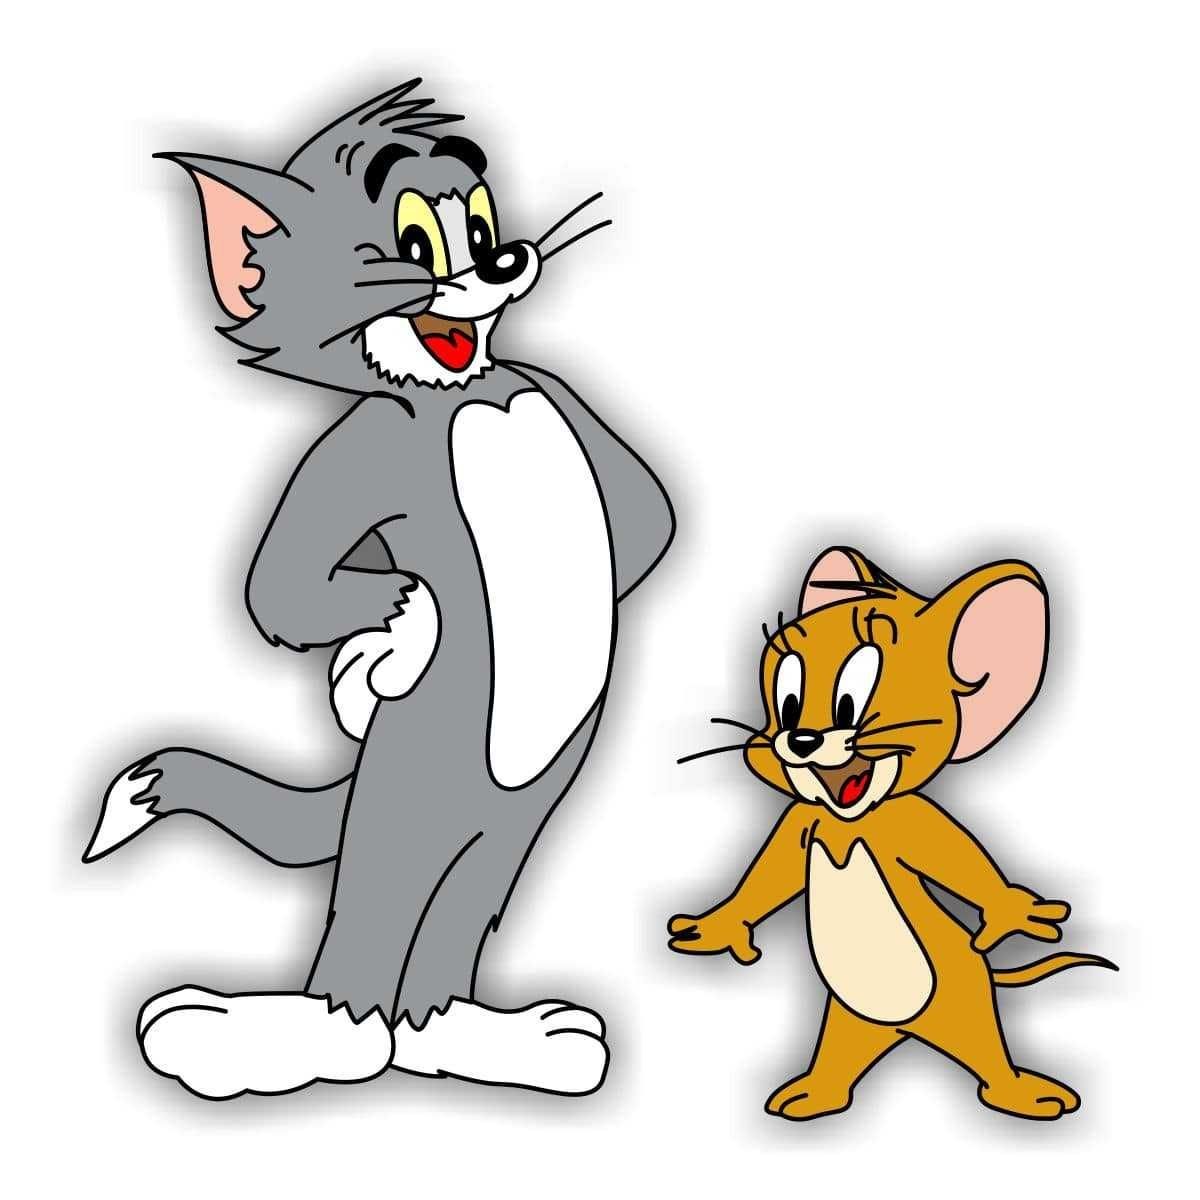 The cartoon character tom and jerry - Tom and Jerry